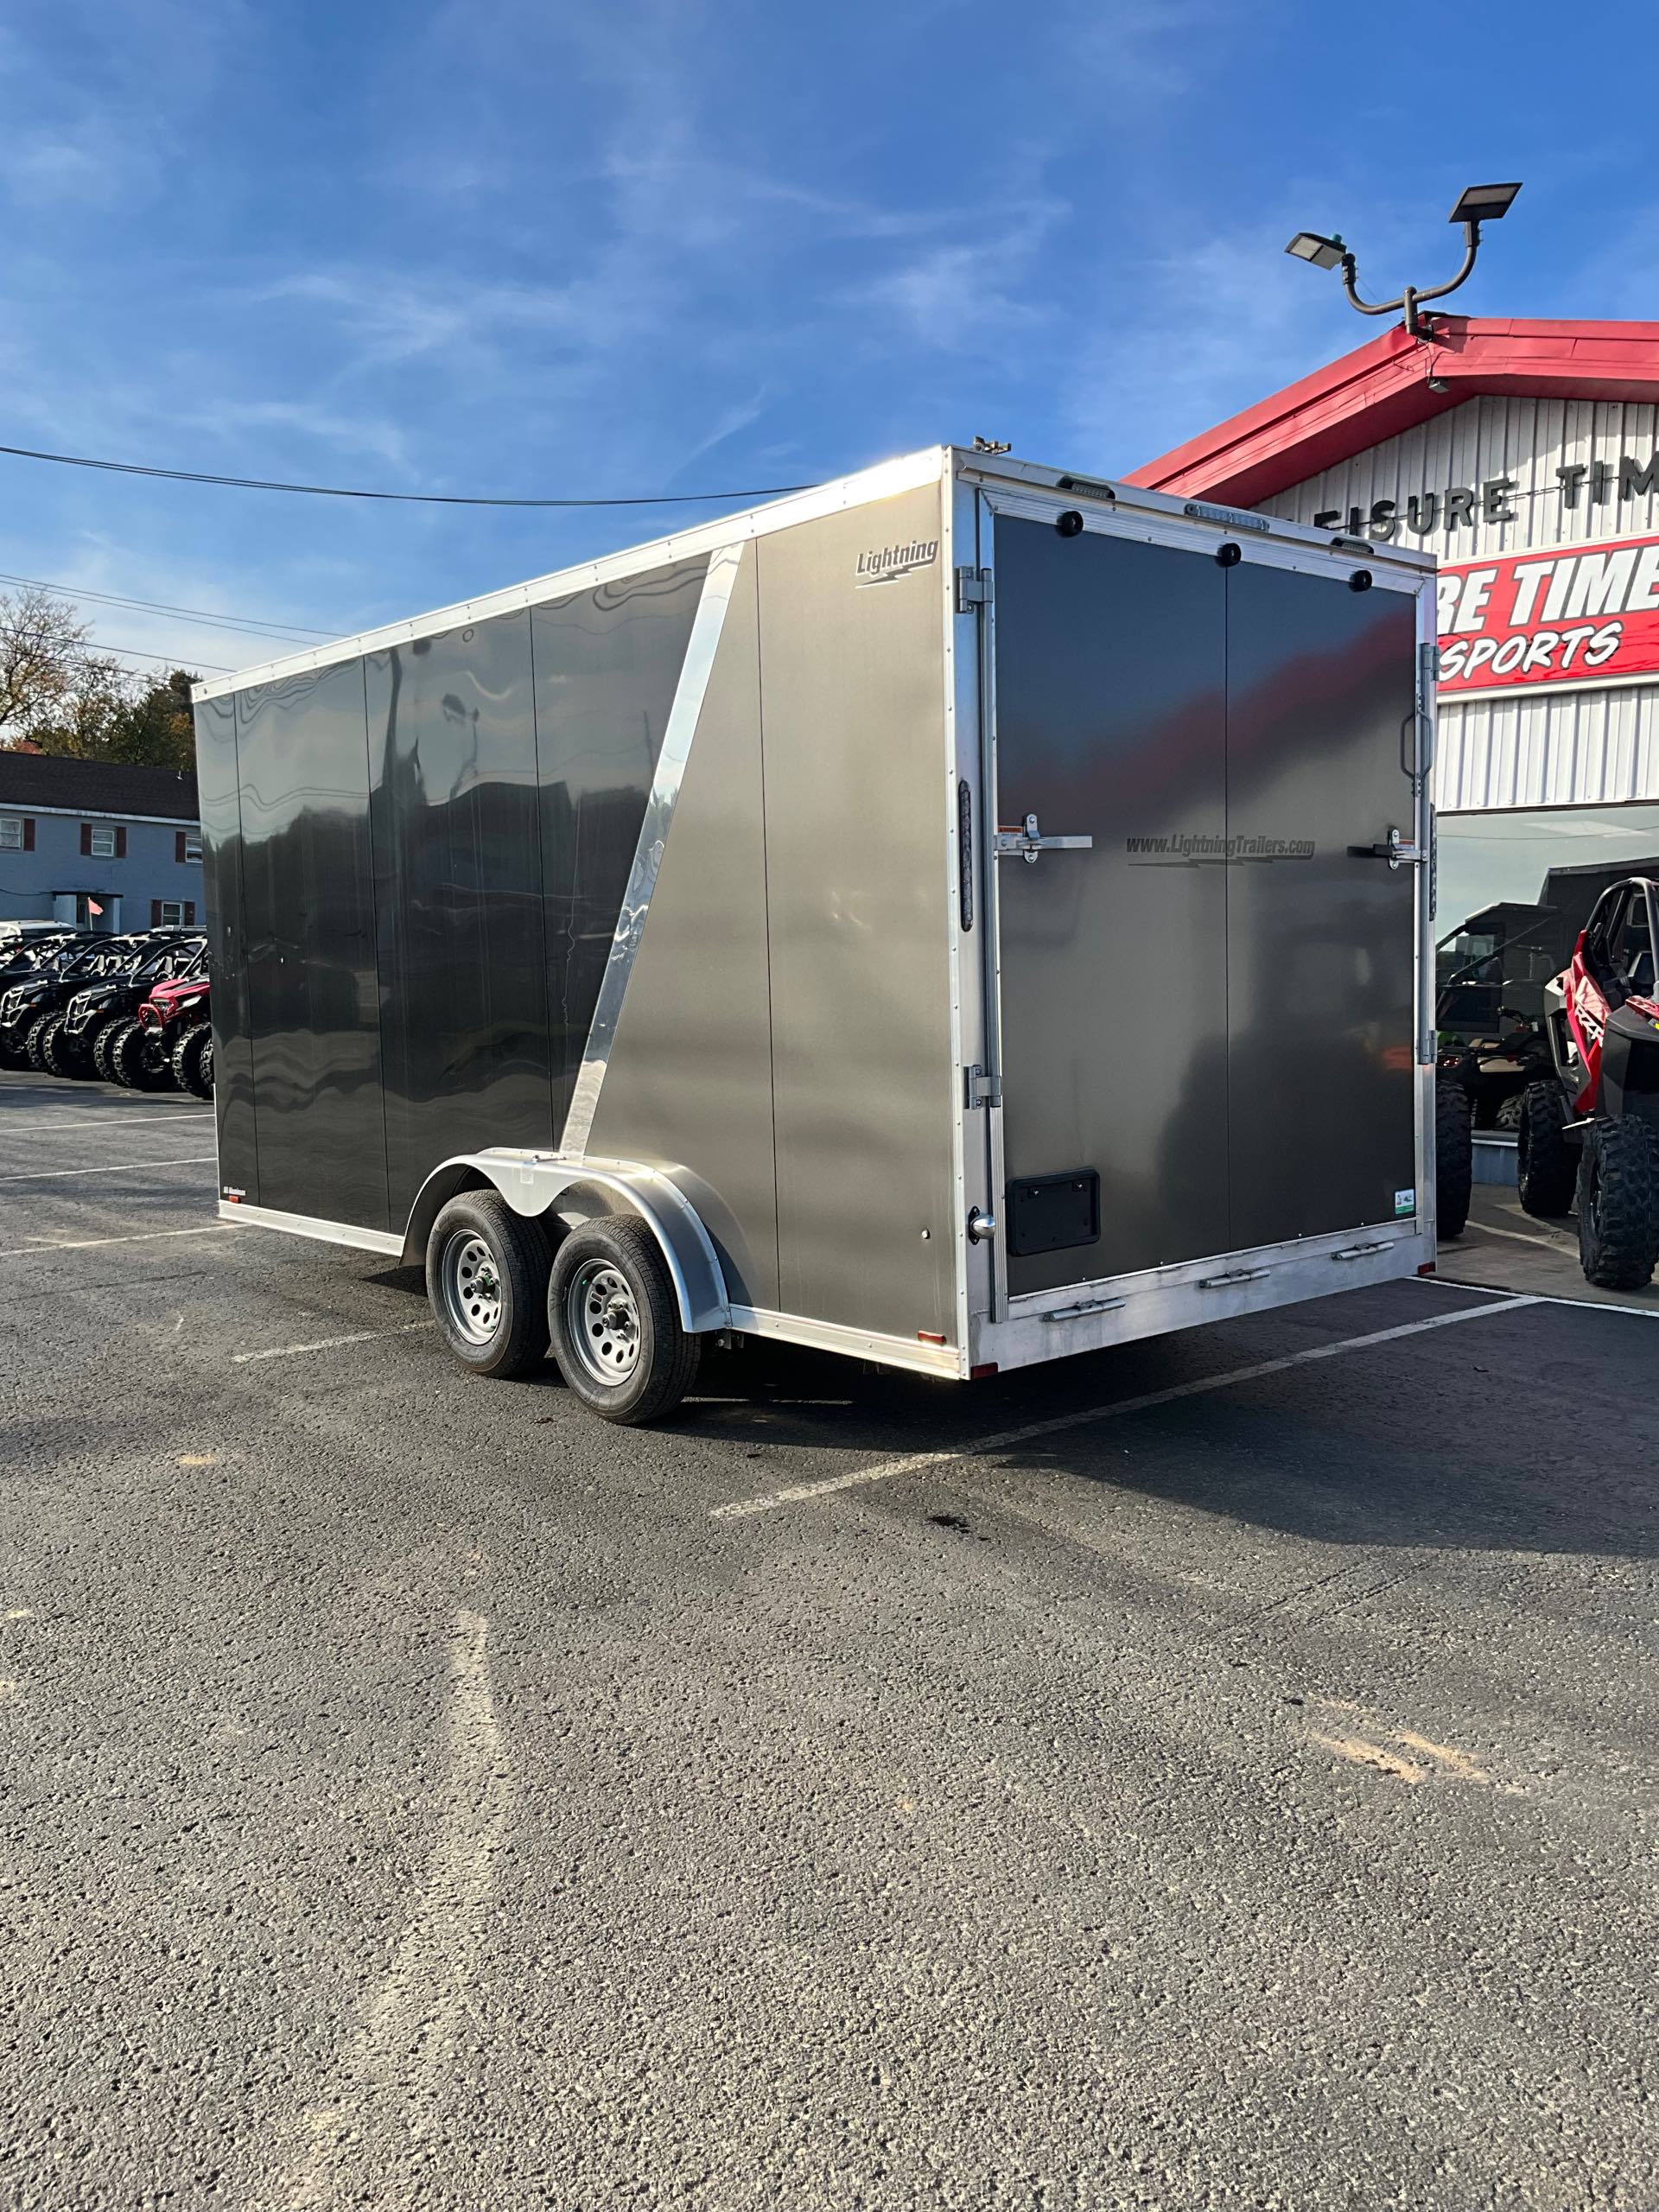 2023 LIGHTNING LTF716TA2 at Leisure Time Powersports of Corry